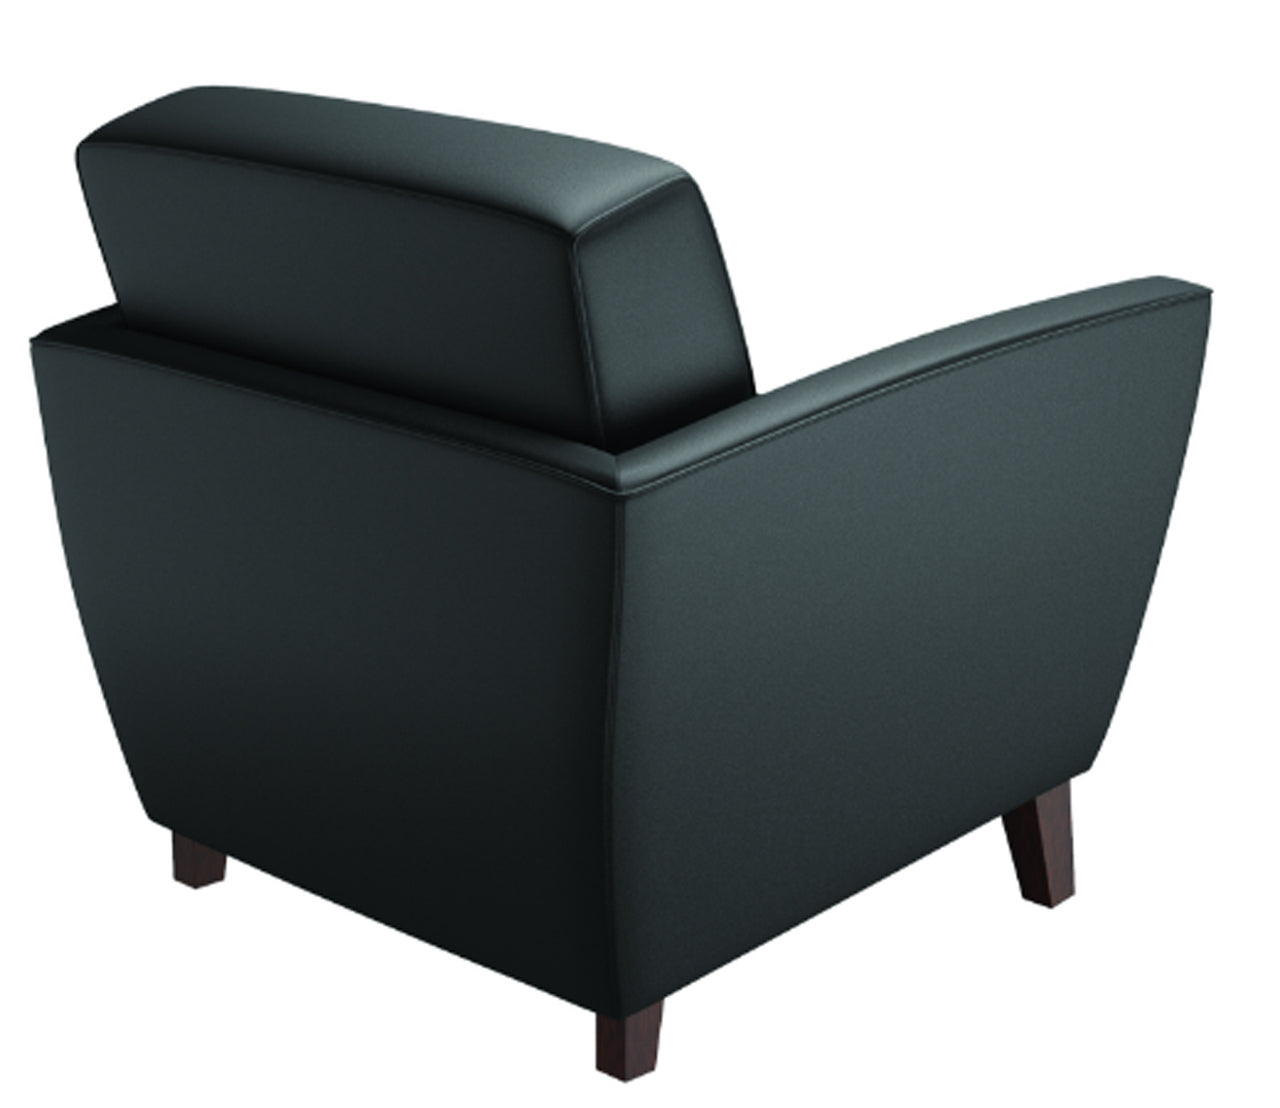 Compel Levengo Lounge Chair - New CLOSEOUT